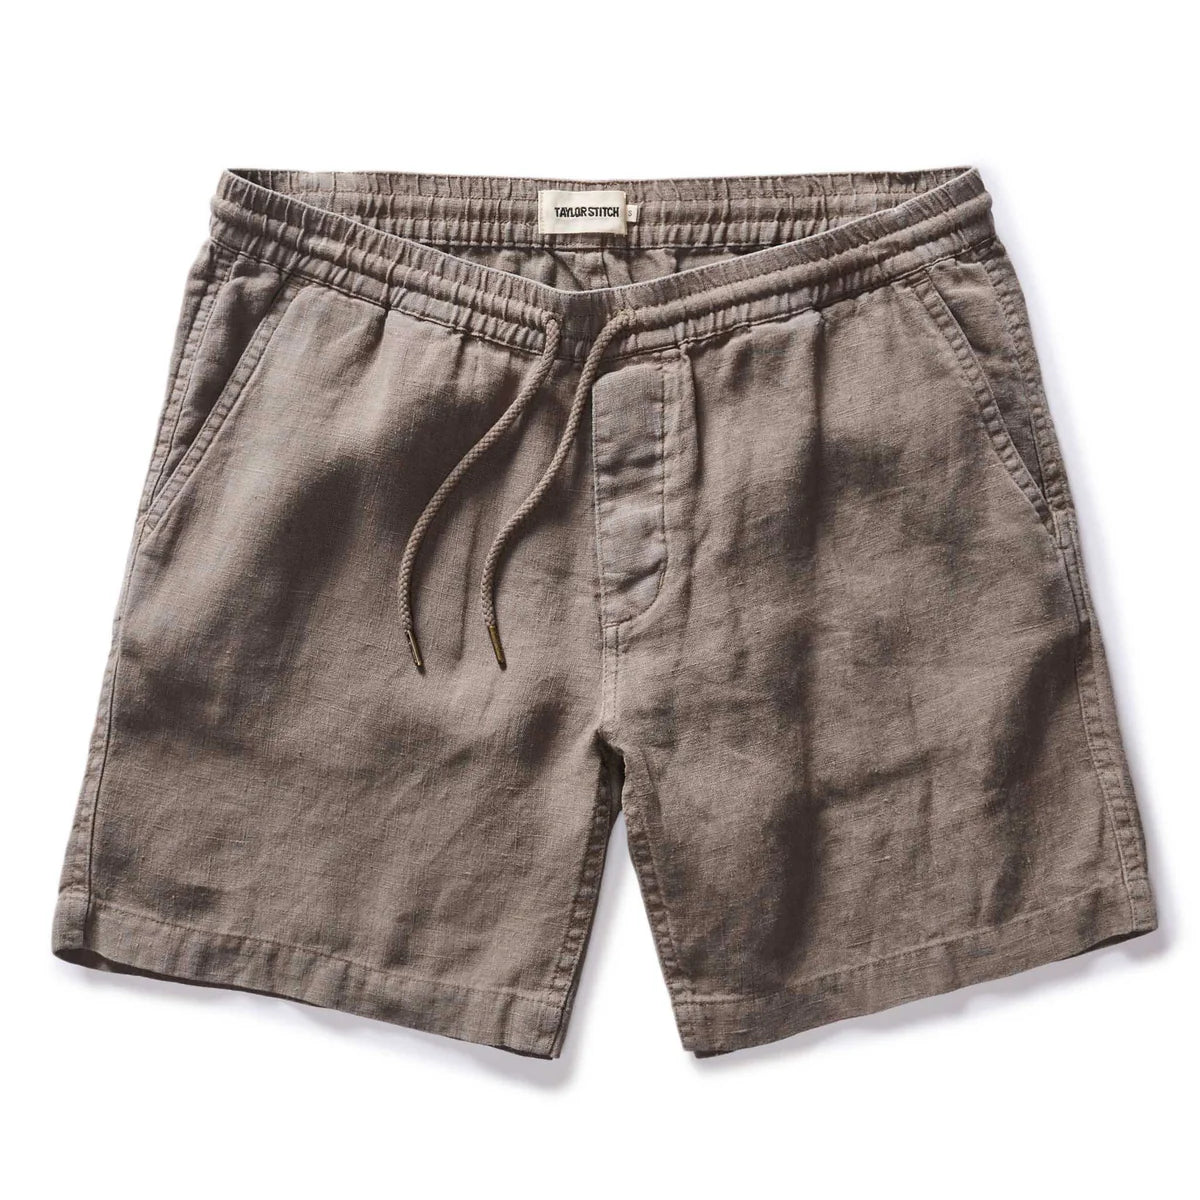 Taylor Stitch - The Apres Short in Canteen Hemp